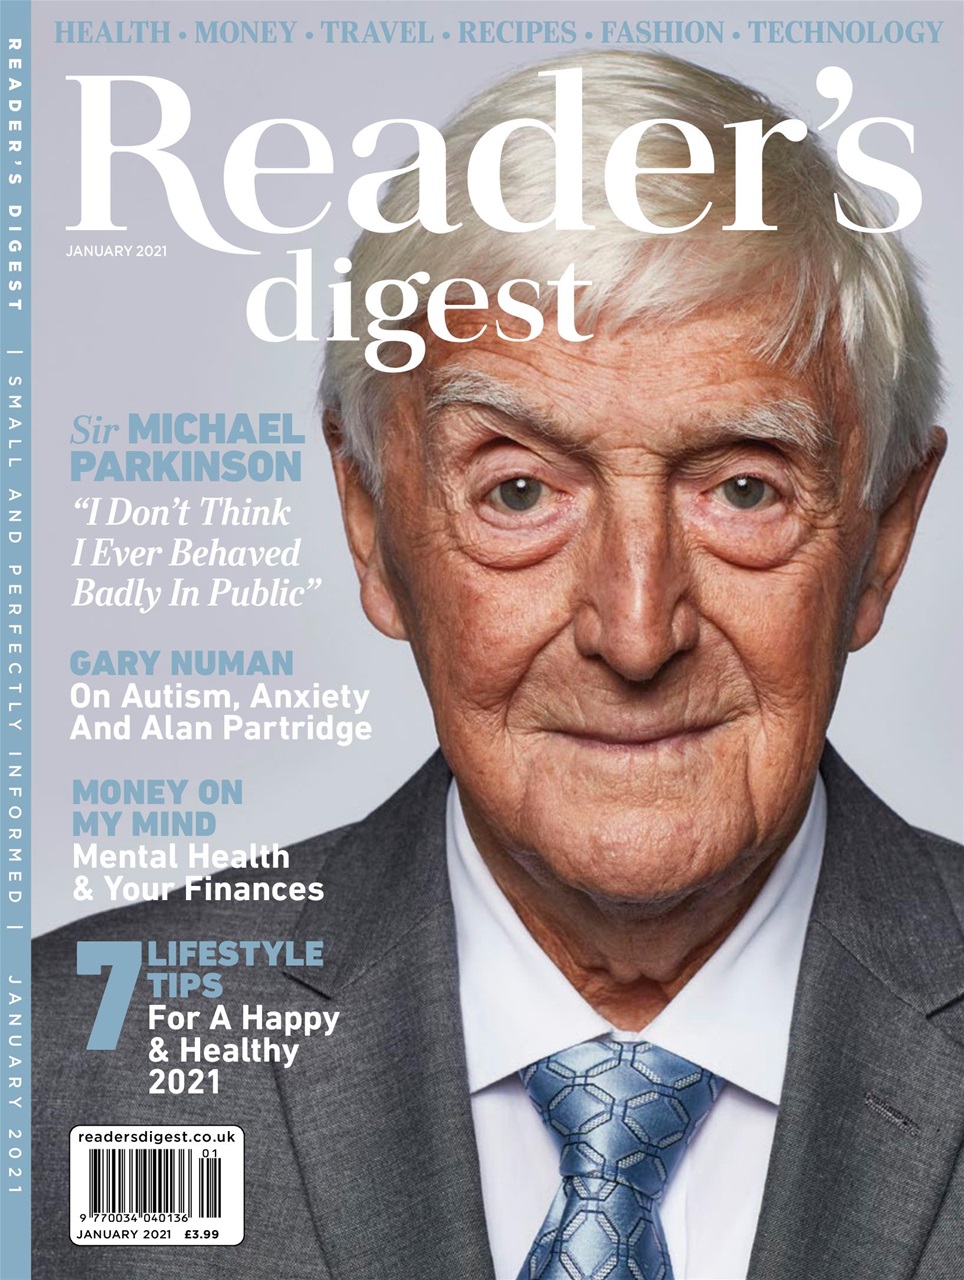 Reader's Digest Magazine Reader's Digest January 2021 Subscriptions